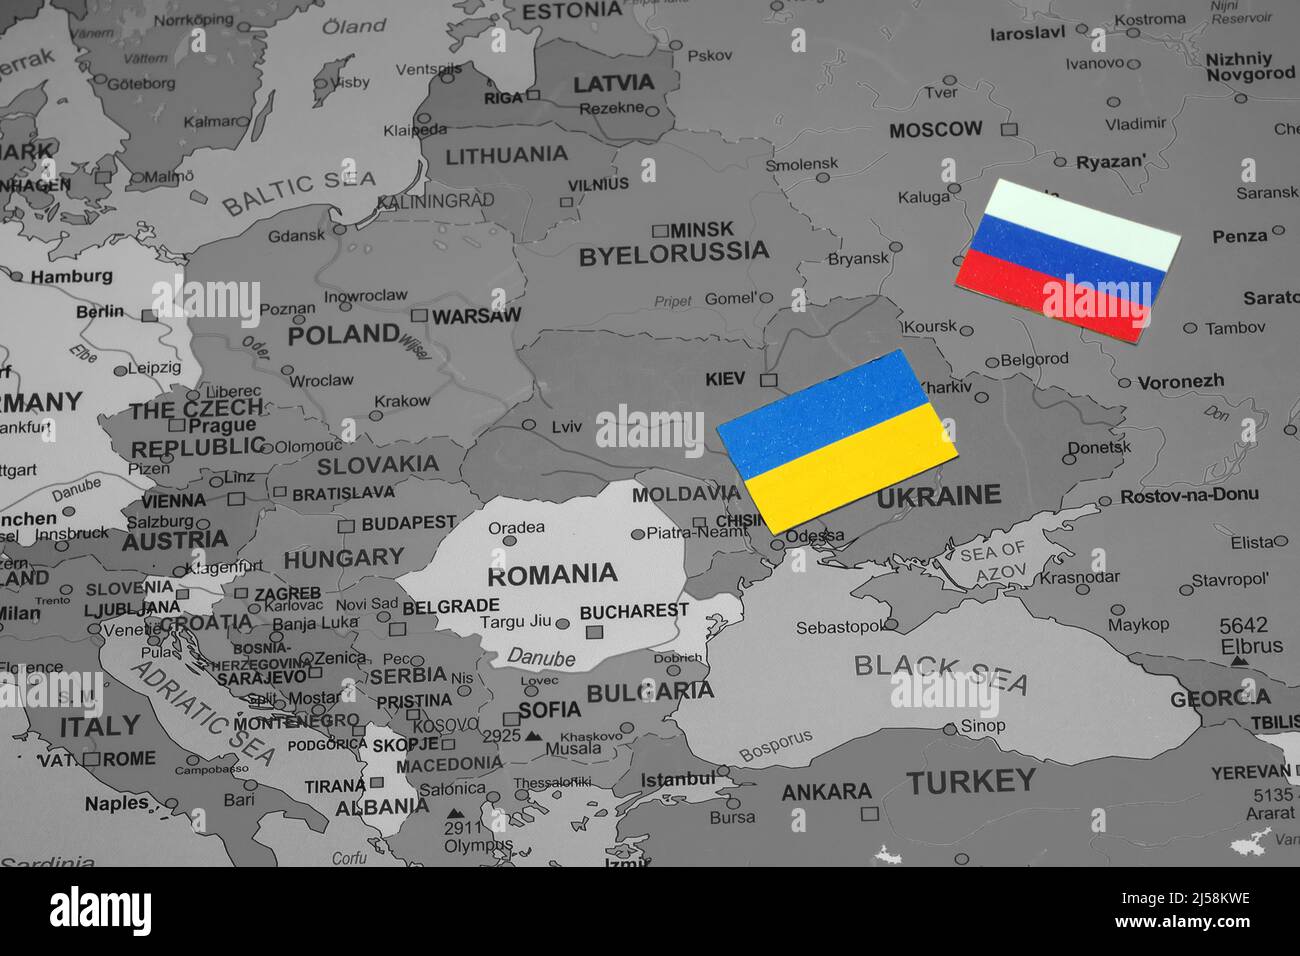 Ukrainian and Russian flags on the map of Europe. Stock Photo